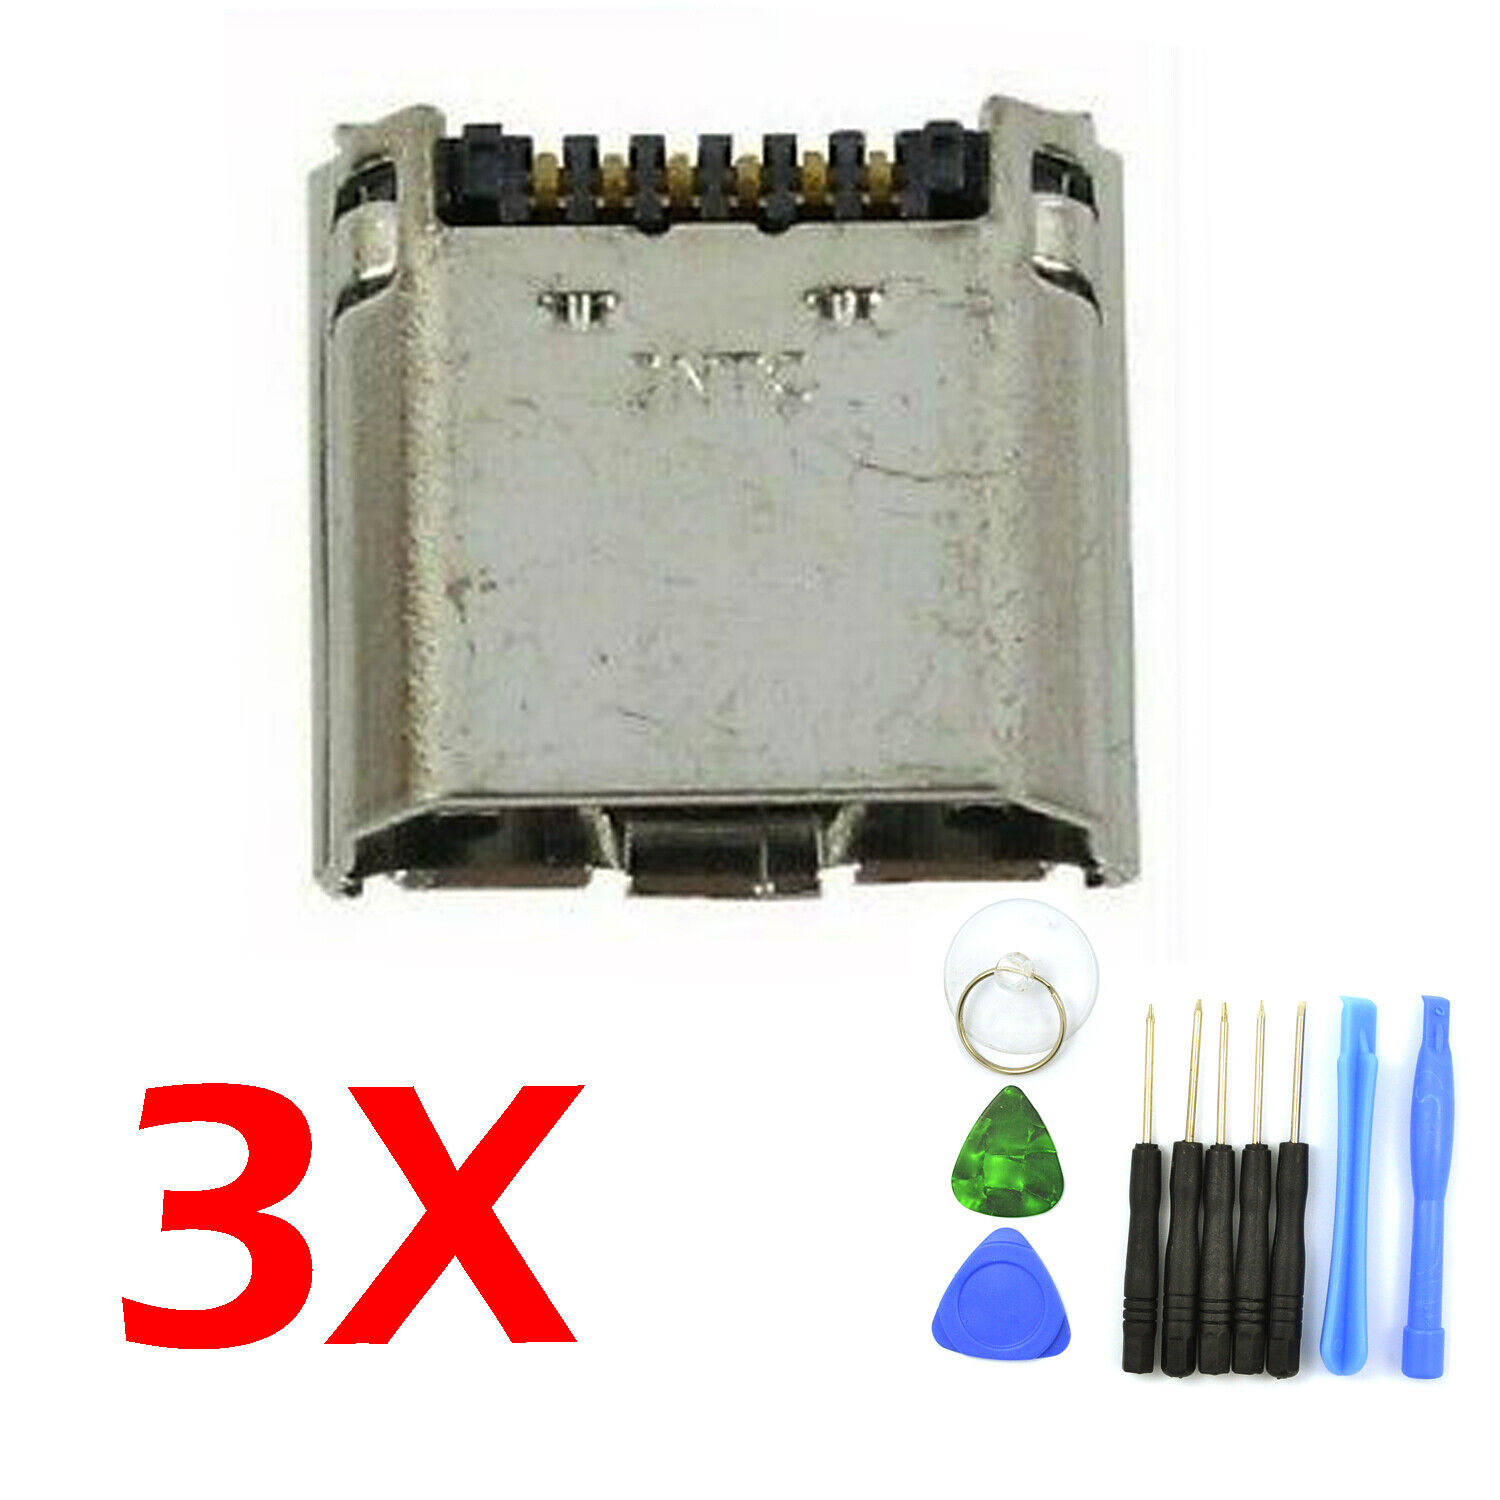 3x Micro USB Charging Port For Samsung Galaxy Tab 4 7.0 SM-T230N SM-T230NU USA Unbranded Does Not Apply